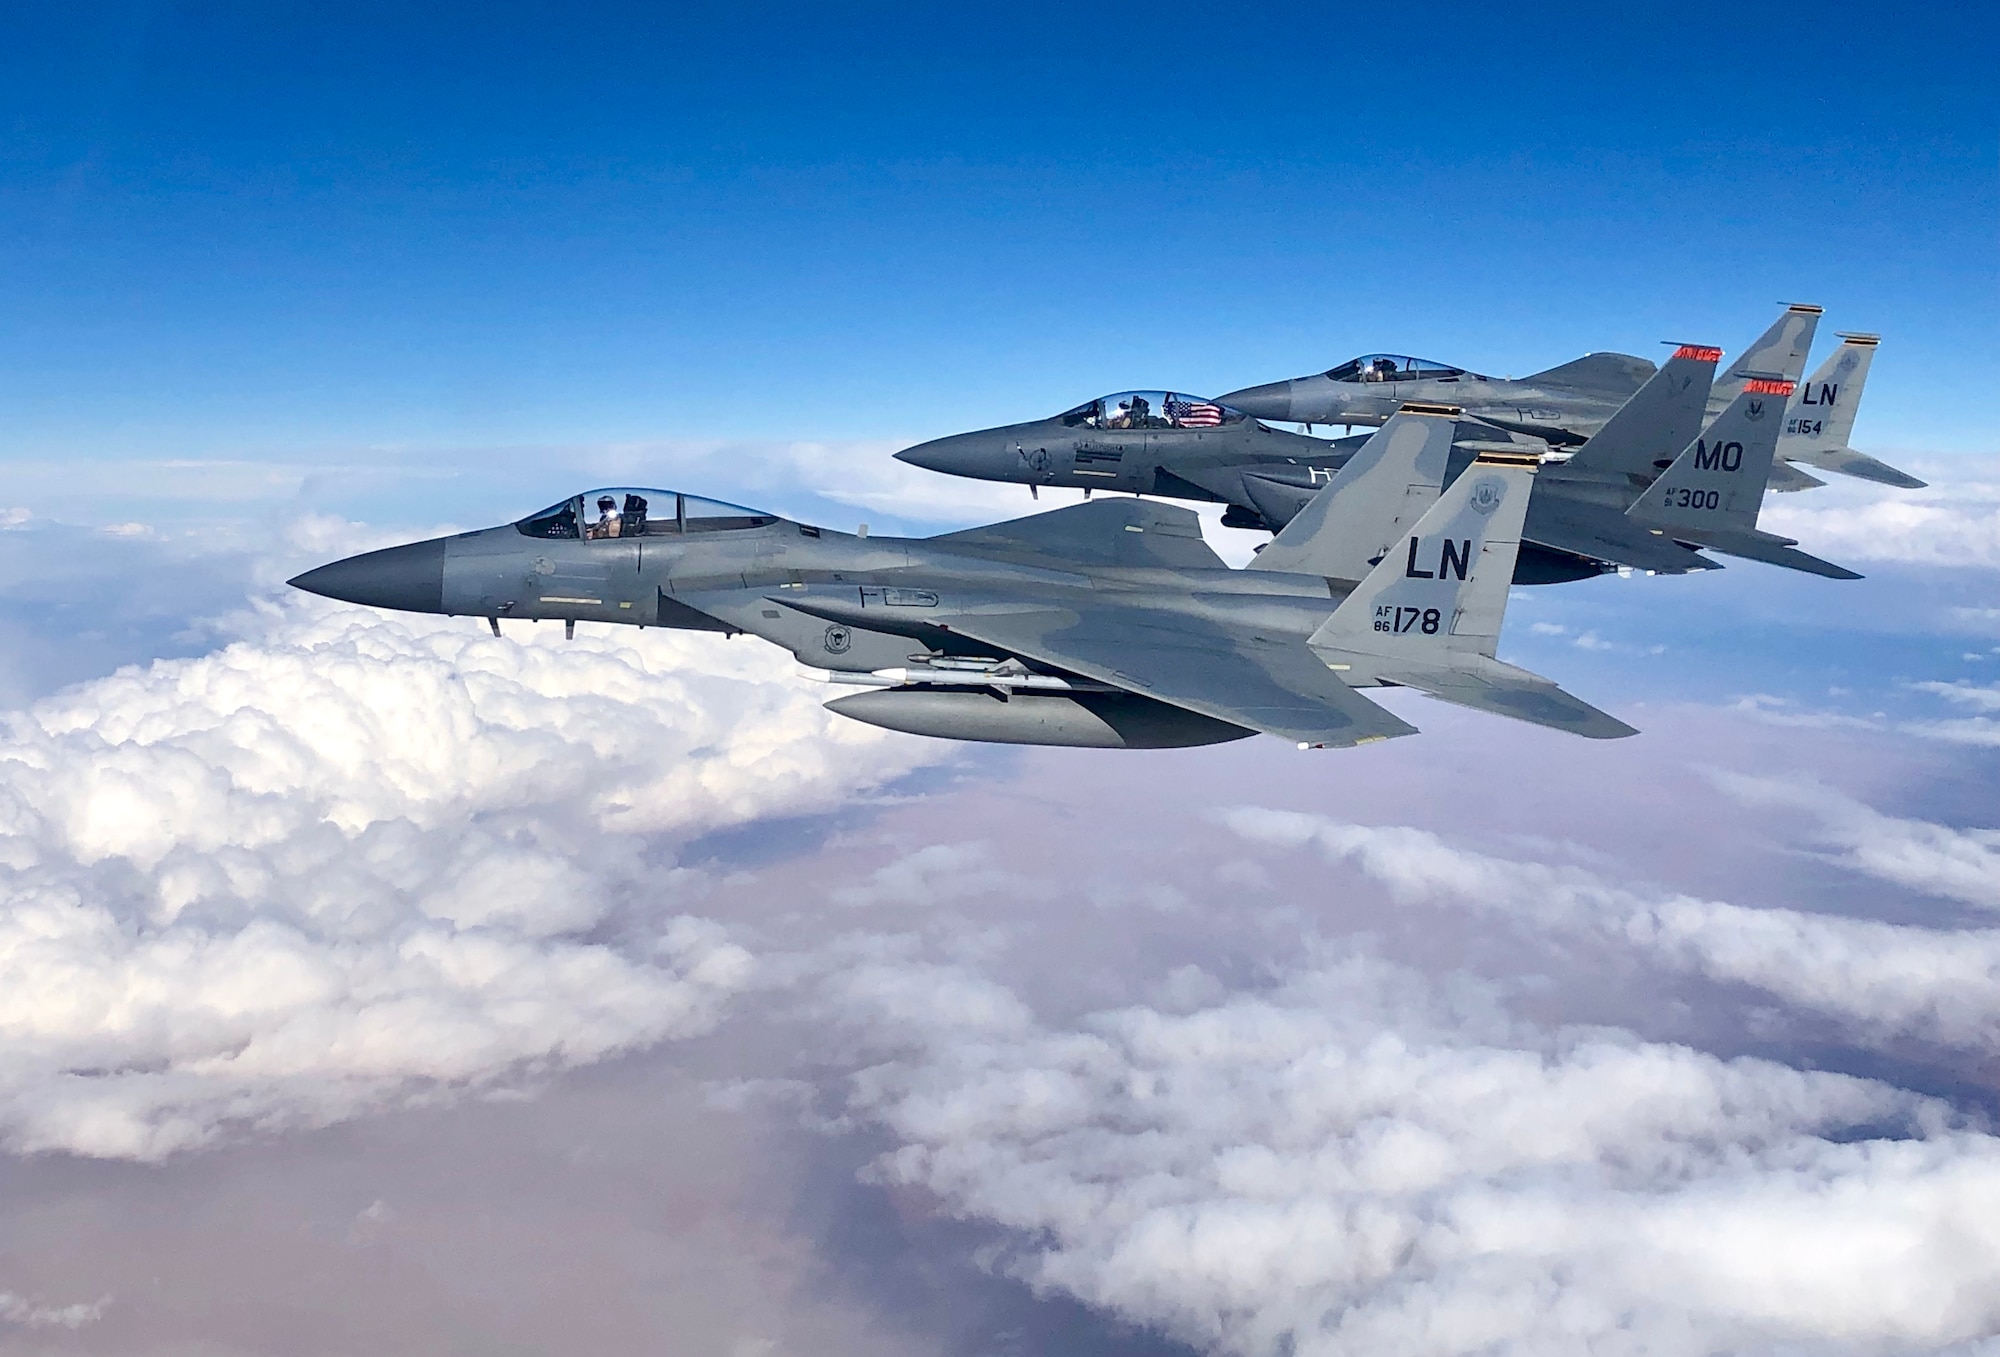 F-15C Eagles and an F-15E Strike Eagle fly over an undisclosed location in Southeast Asia in honor of the 493rd Fighter Squadron assumption of command for incoming commander Lt. Col. Anthony May during a mission supporting ongoing theater operations, February 28, 2019. The 493rd is a combat-ready squadron capable of executing air superiority and air defense missions in support of United States Air Forces in Europe, United States European Command, and NATO operations. (Courtesy photo)